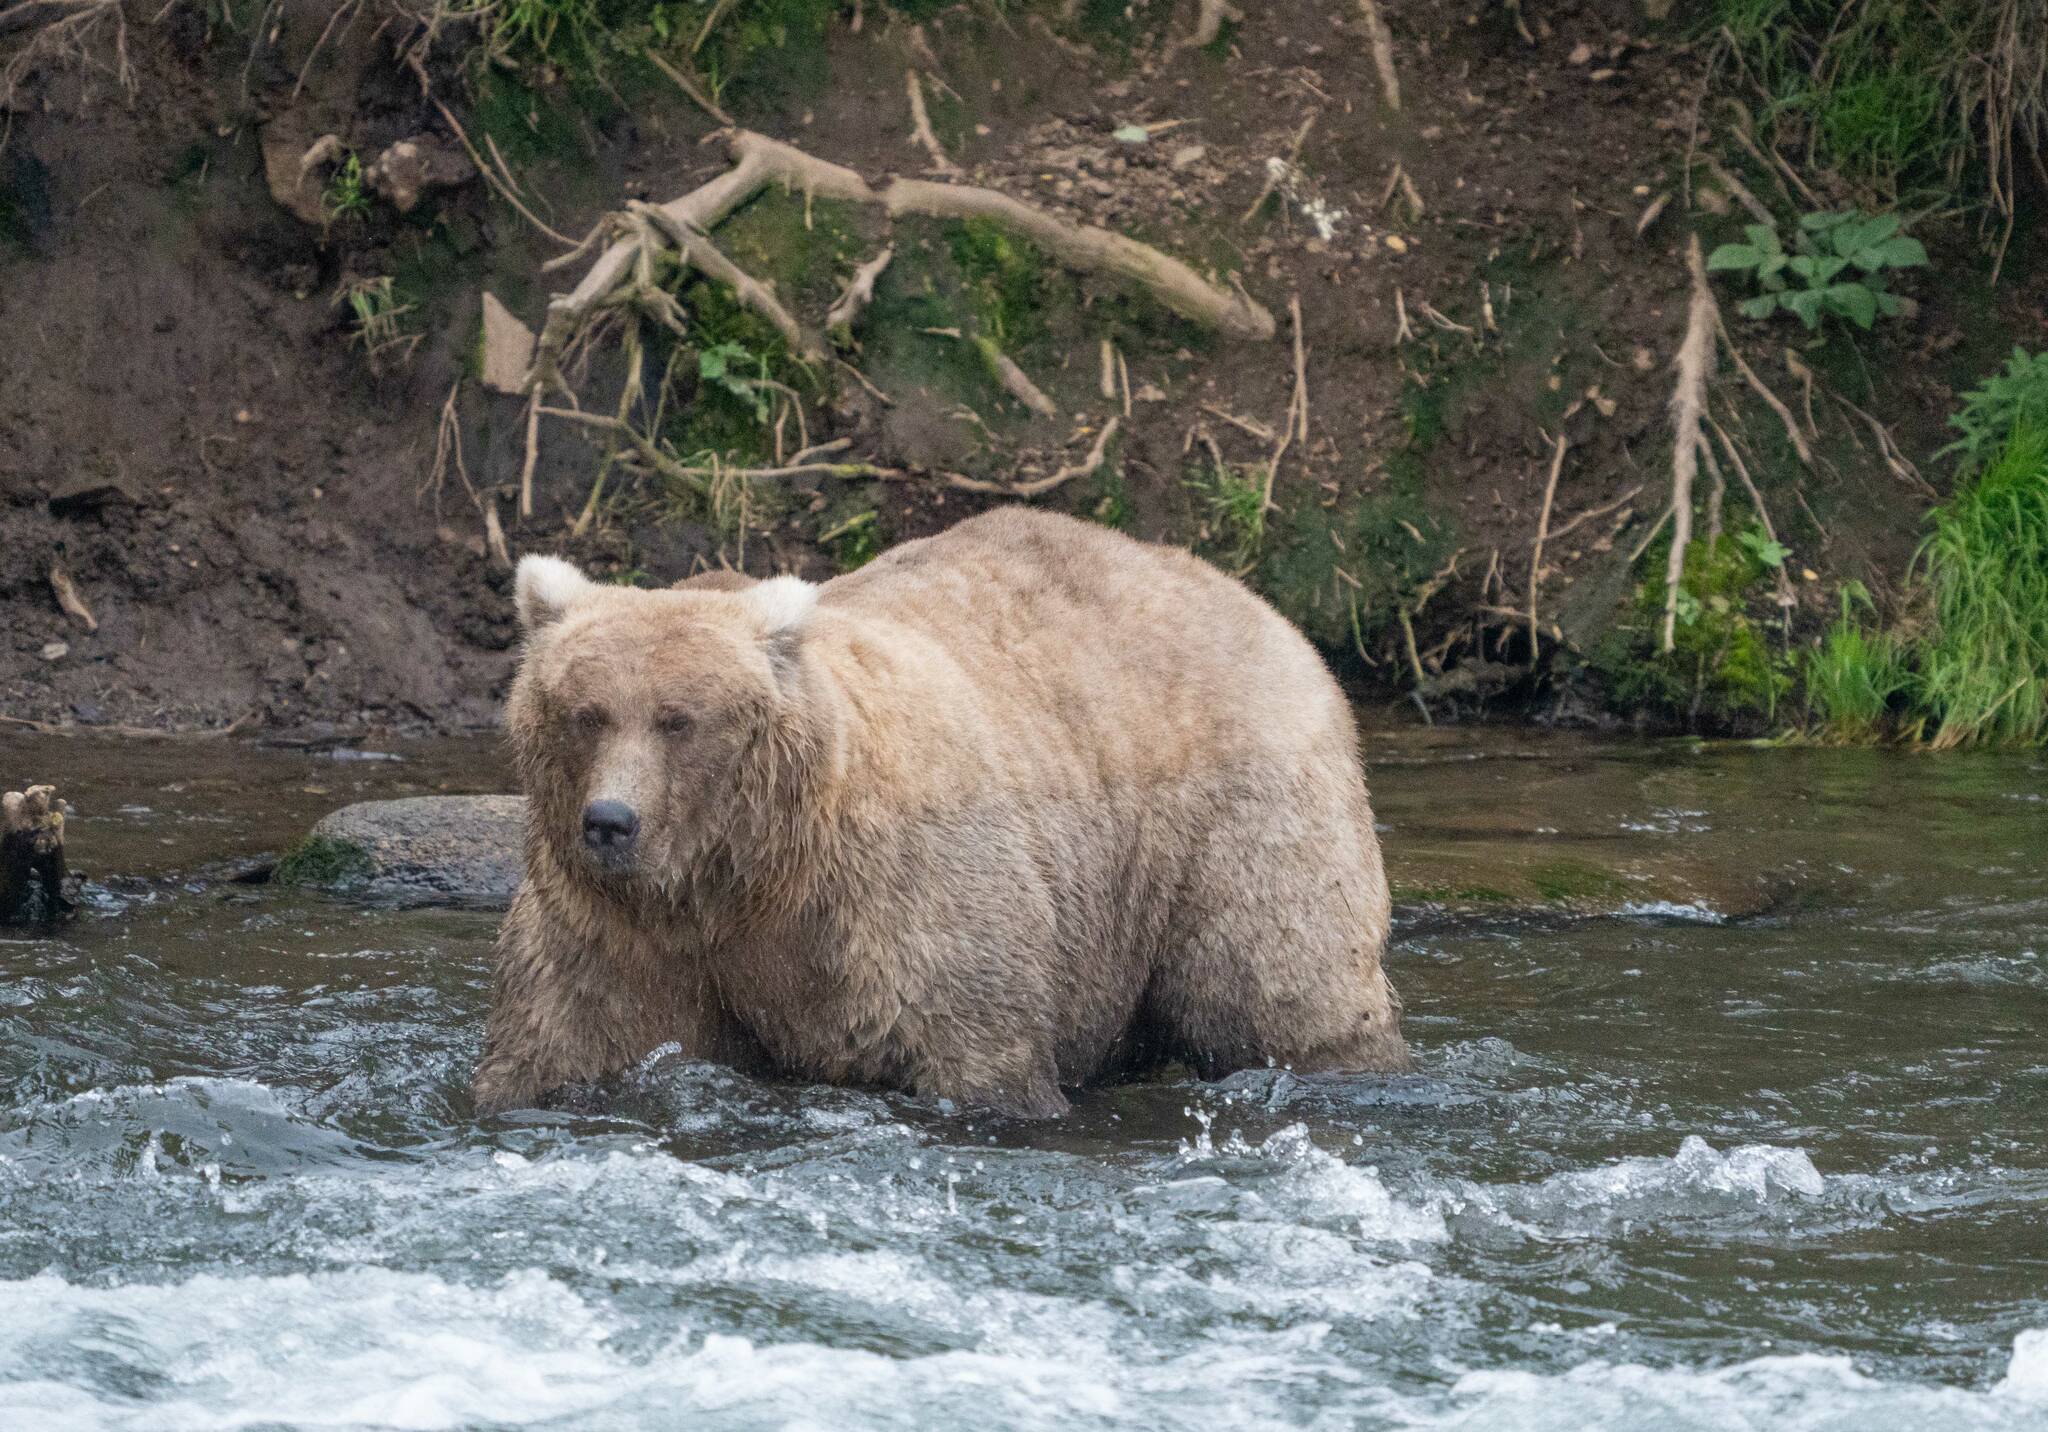 Bear 128 Grazer, with her recognizable blonde ears, wades through the water of the Brooks River in Katmai National Park, Alaska. (Photo courtesy Felicia Jimenez/National Park Service)